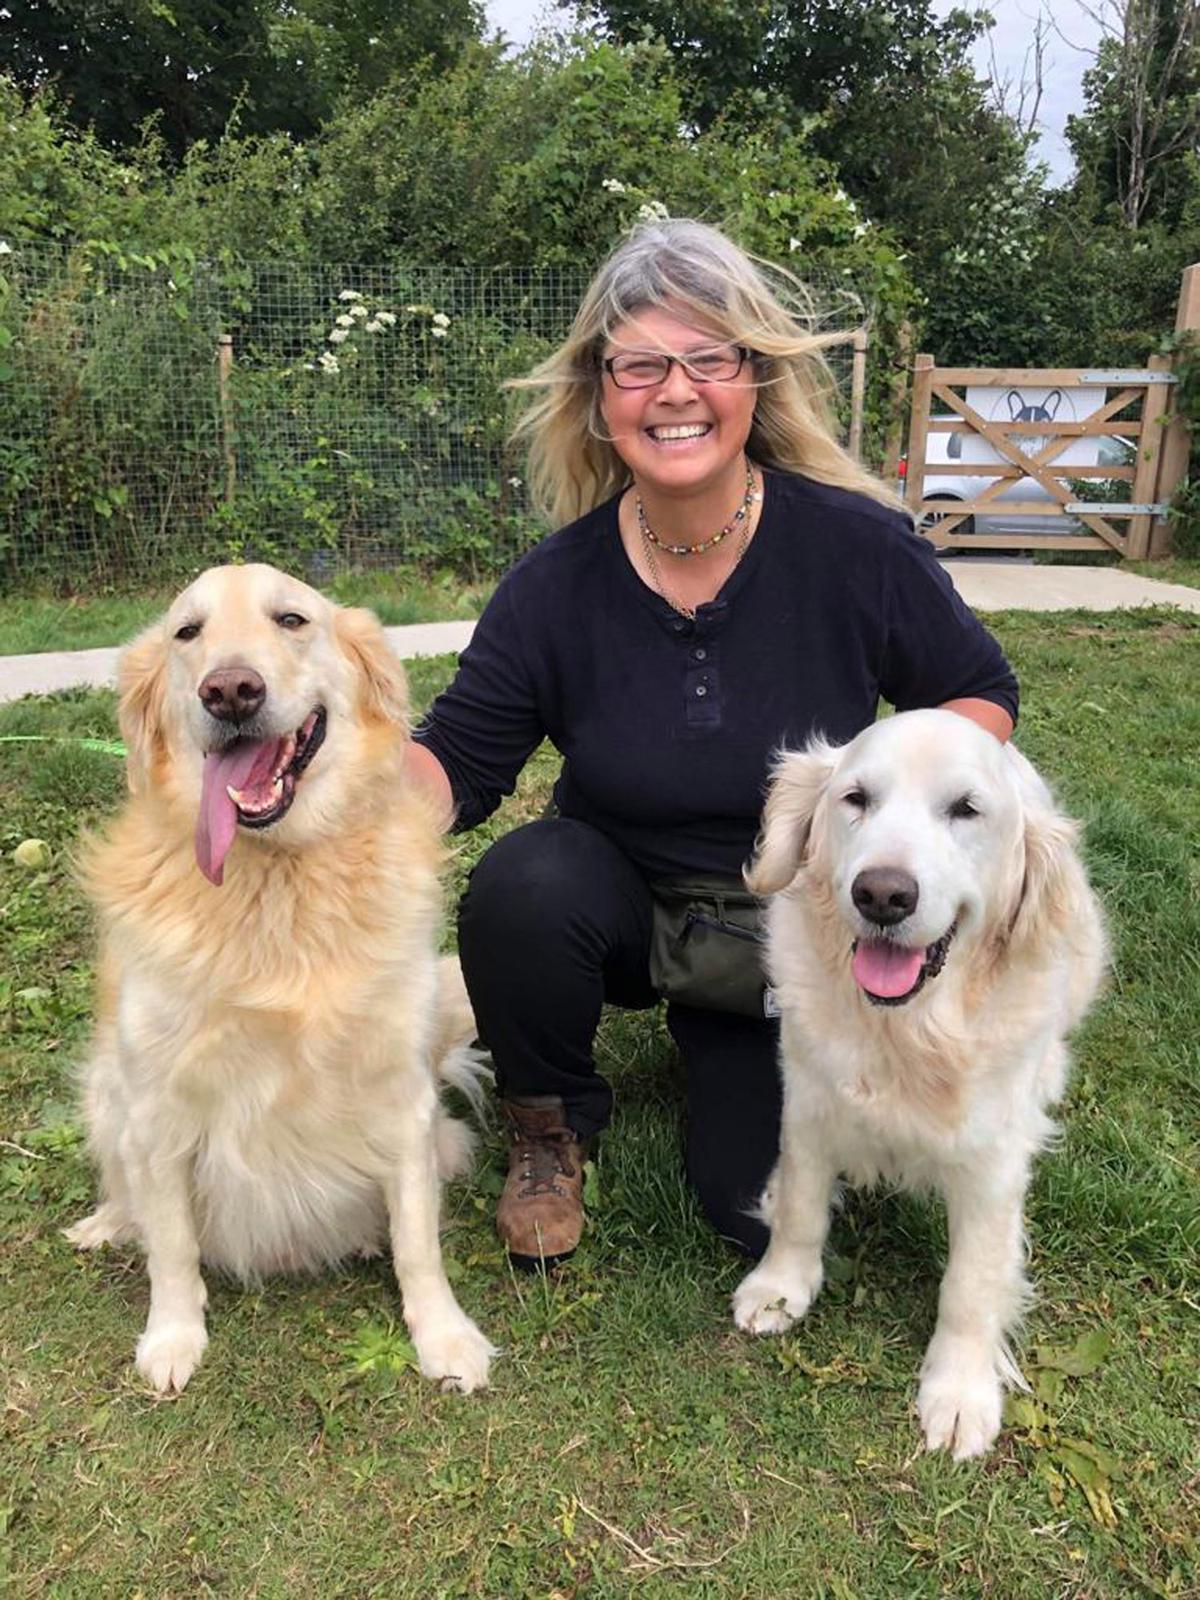  Duncan and Daisy with their owner, Lisa. (Caters News)